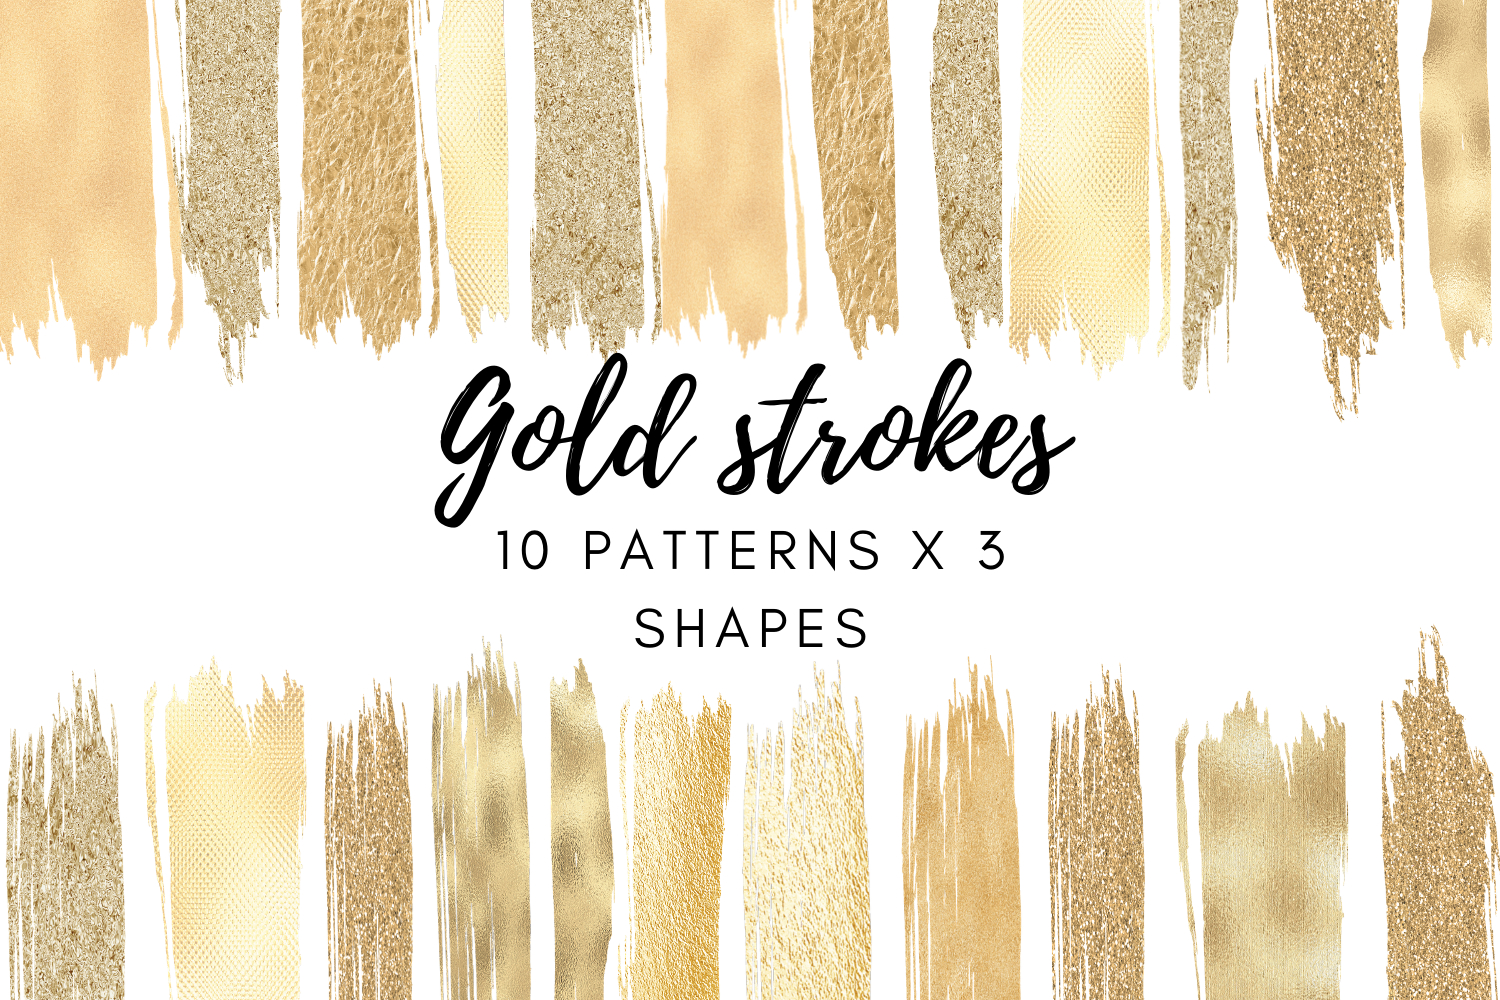 10 Rainbow Brush Strokes Clipart with gold glitter and foil in digital PNG format instant download for commercial use